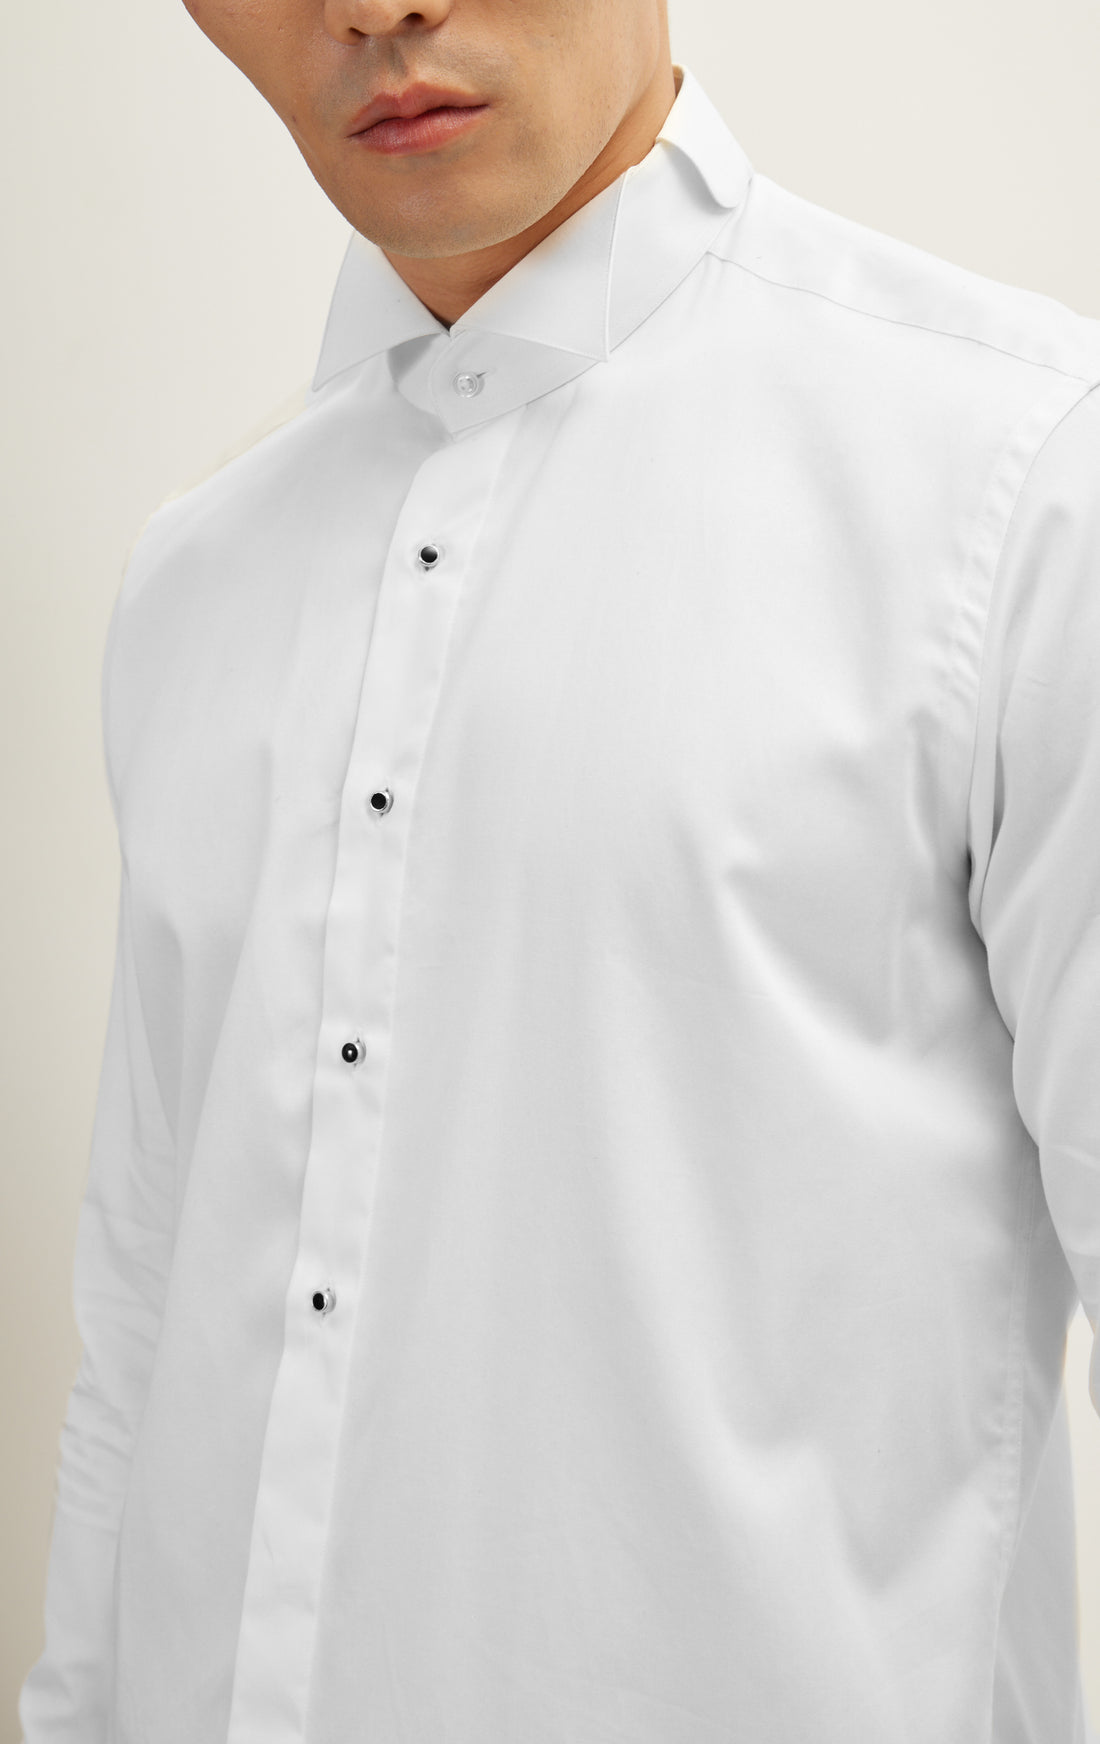 Wing Classical Top  Front Stud Tuxedo Shirt - White